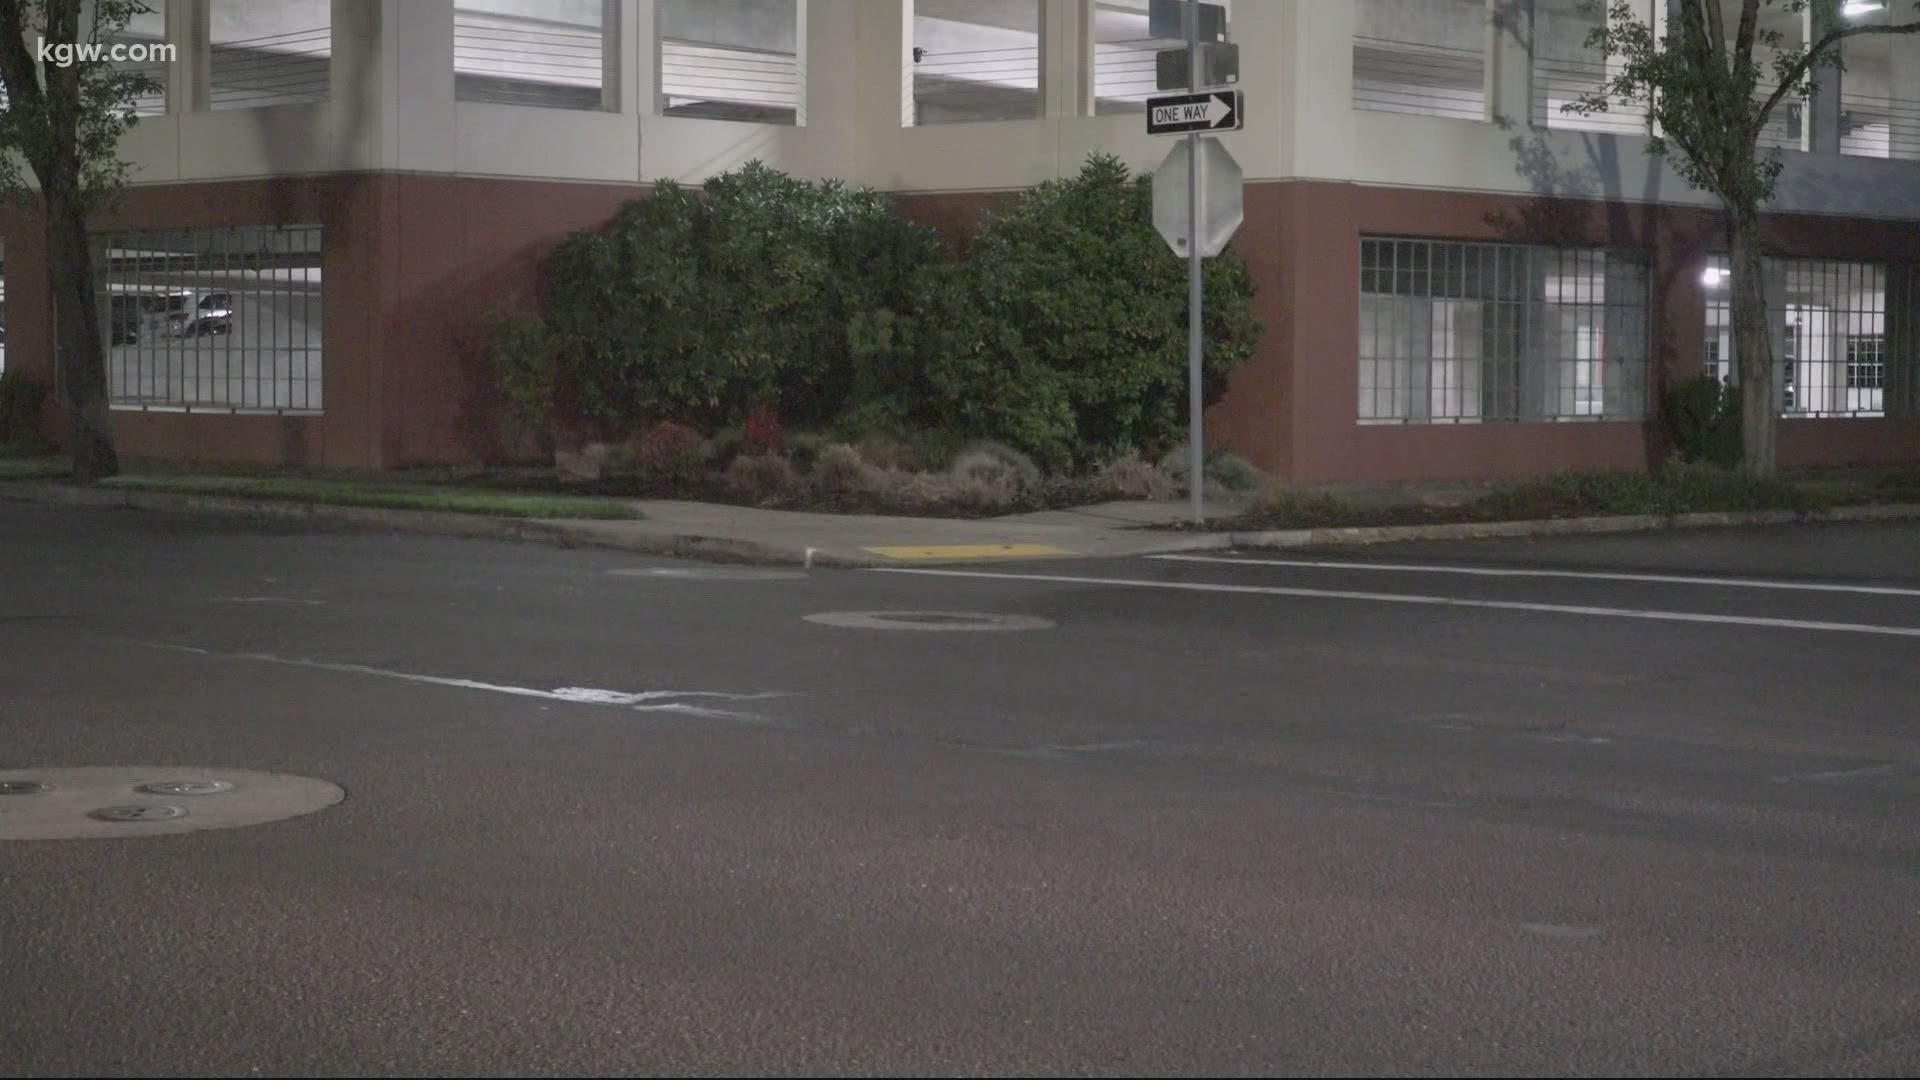 Three teens were hit in Hillsboro at an unmarked crosswalk. Law enforcement said that two lanes of traffic stopped for the teens but a third did not.